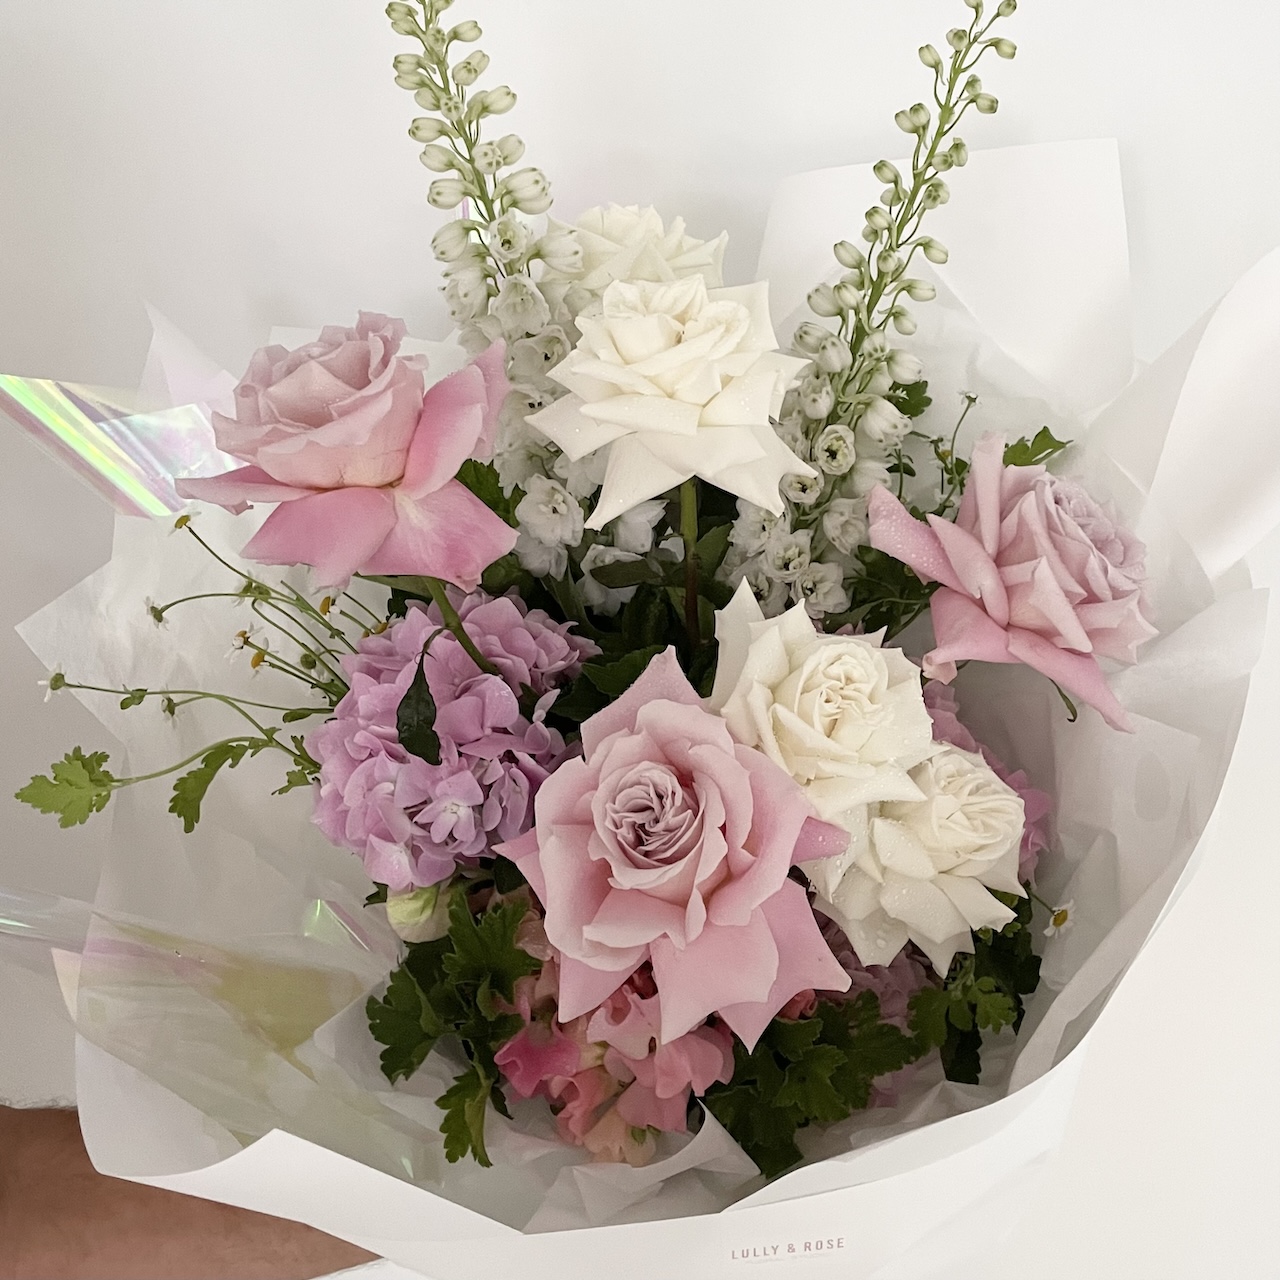 Bouquet of flowers in pink and white flowers from LULLY & ROSE Floral Studio, for same day flower delivery to the Gold Coast